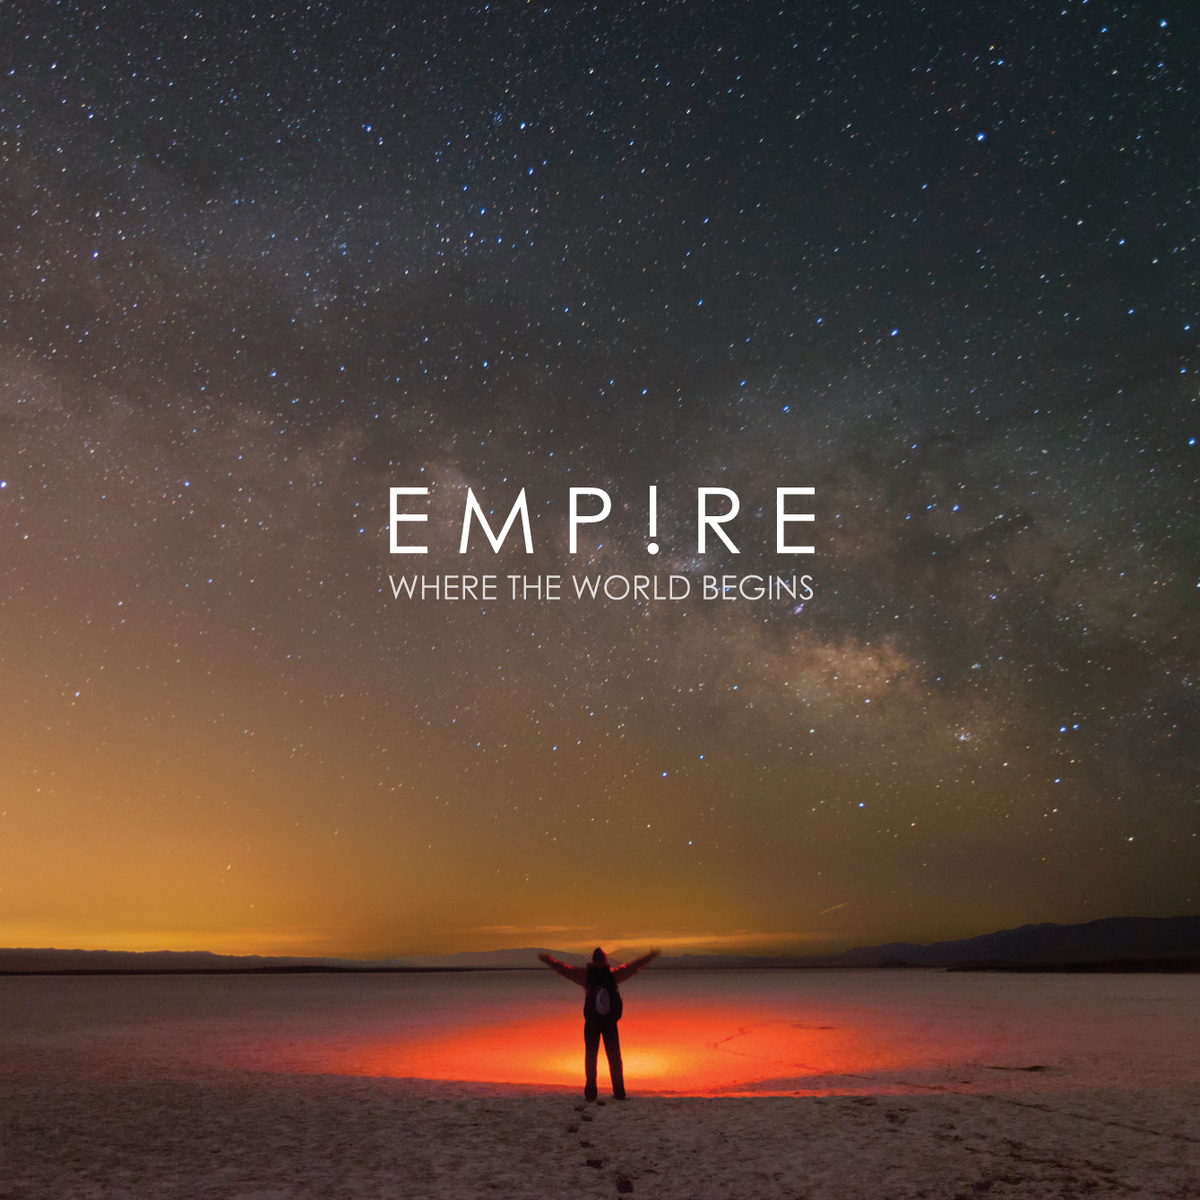 News Added Oct 14, 2013 South West 5 piece EMPIRE will be releasing their dynamic, debut mini album ‘Where The World Begins’ on October 14th, through the bands own Lightside records. EMPIRE will also be giving away lead track (and first single) ‘Black Hearts’ as a free download from the bands Facebook page on October […]